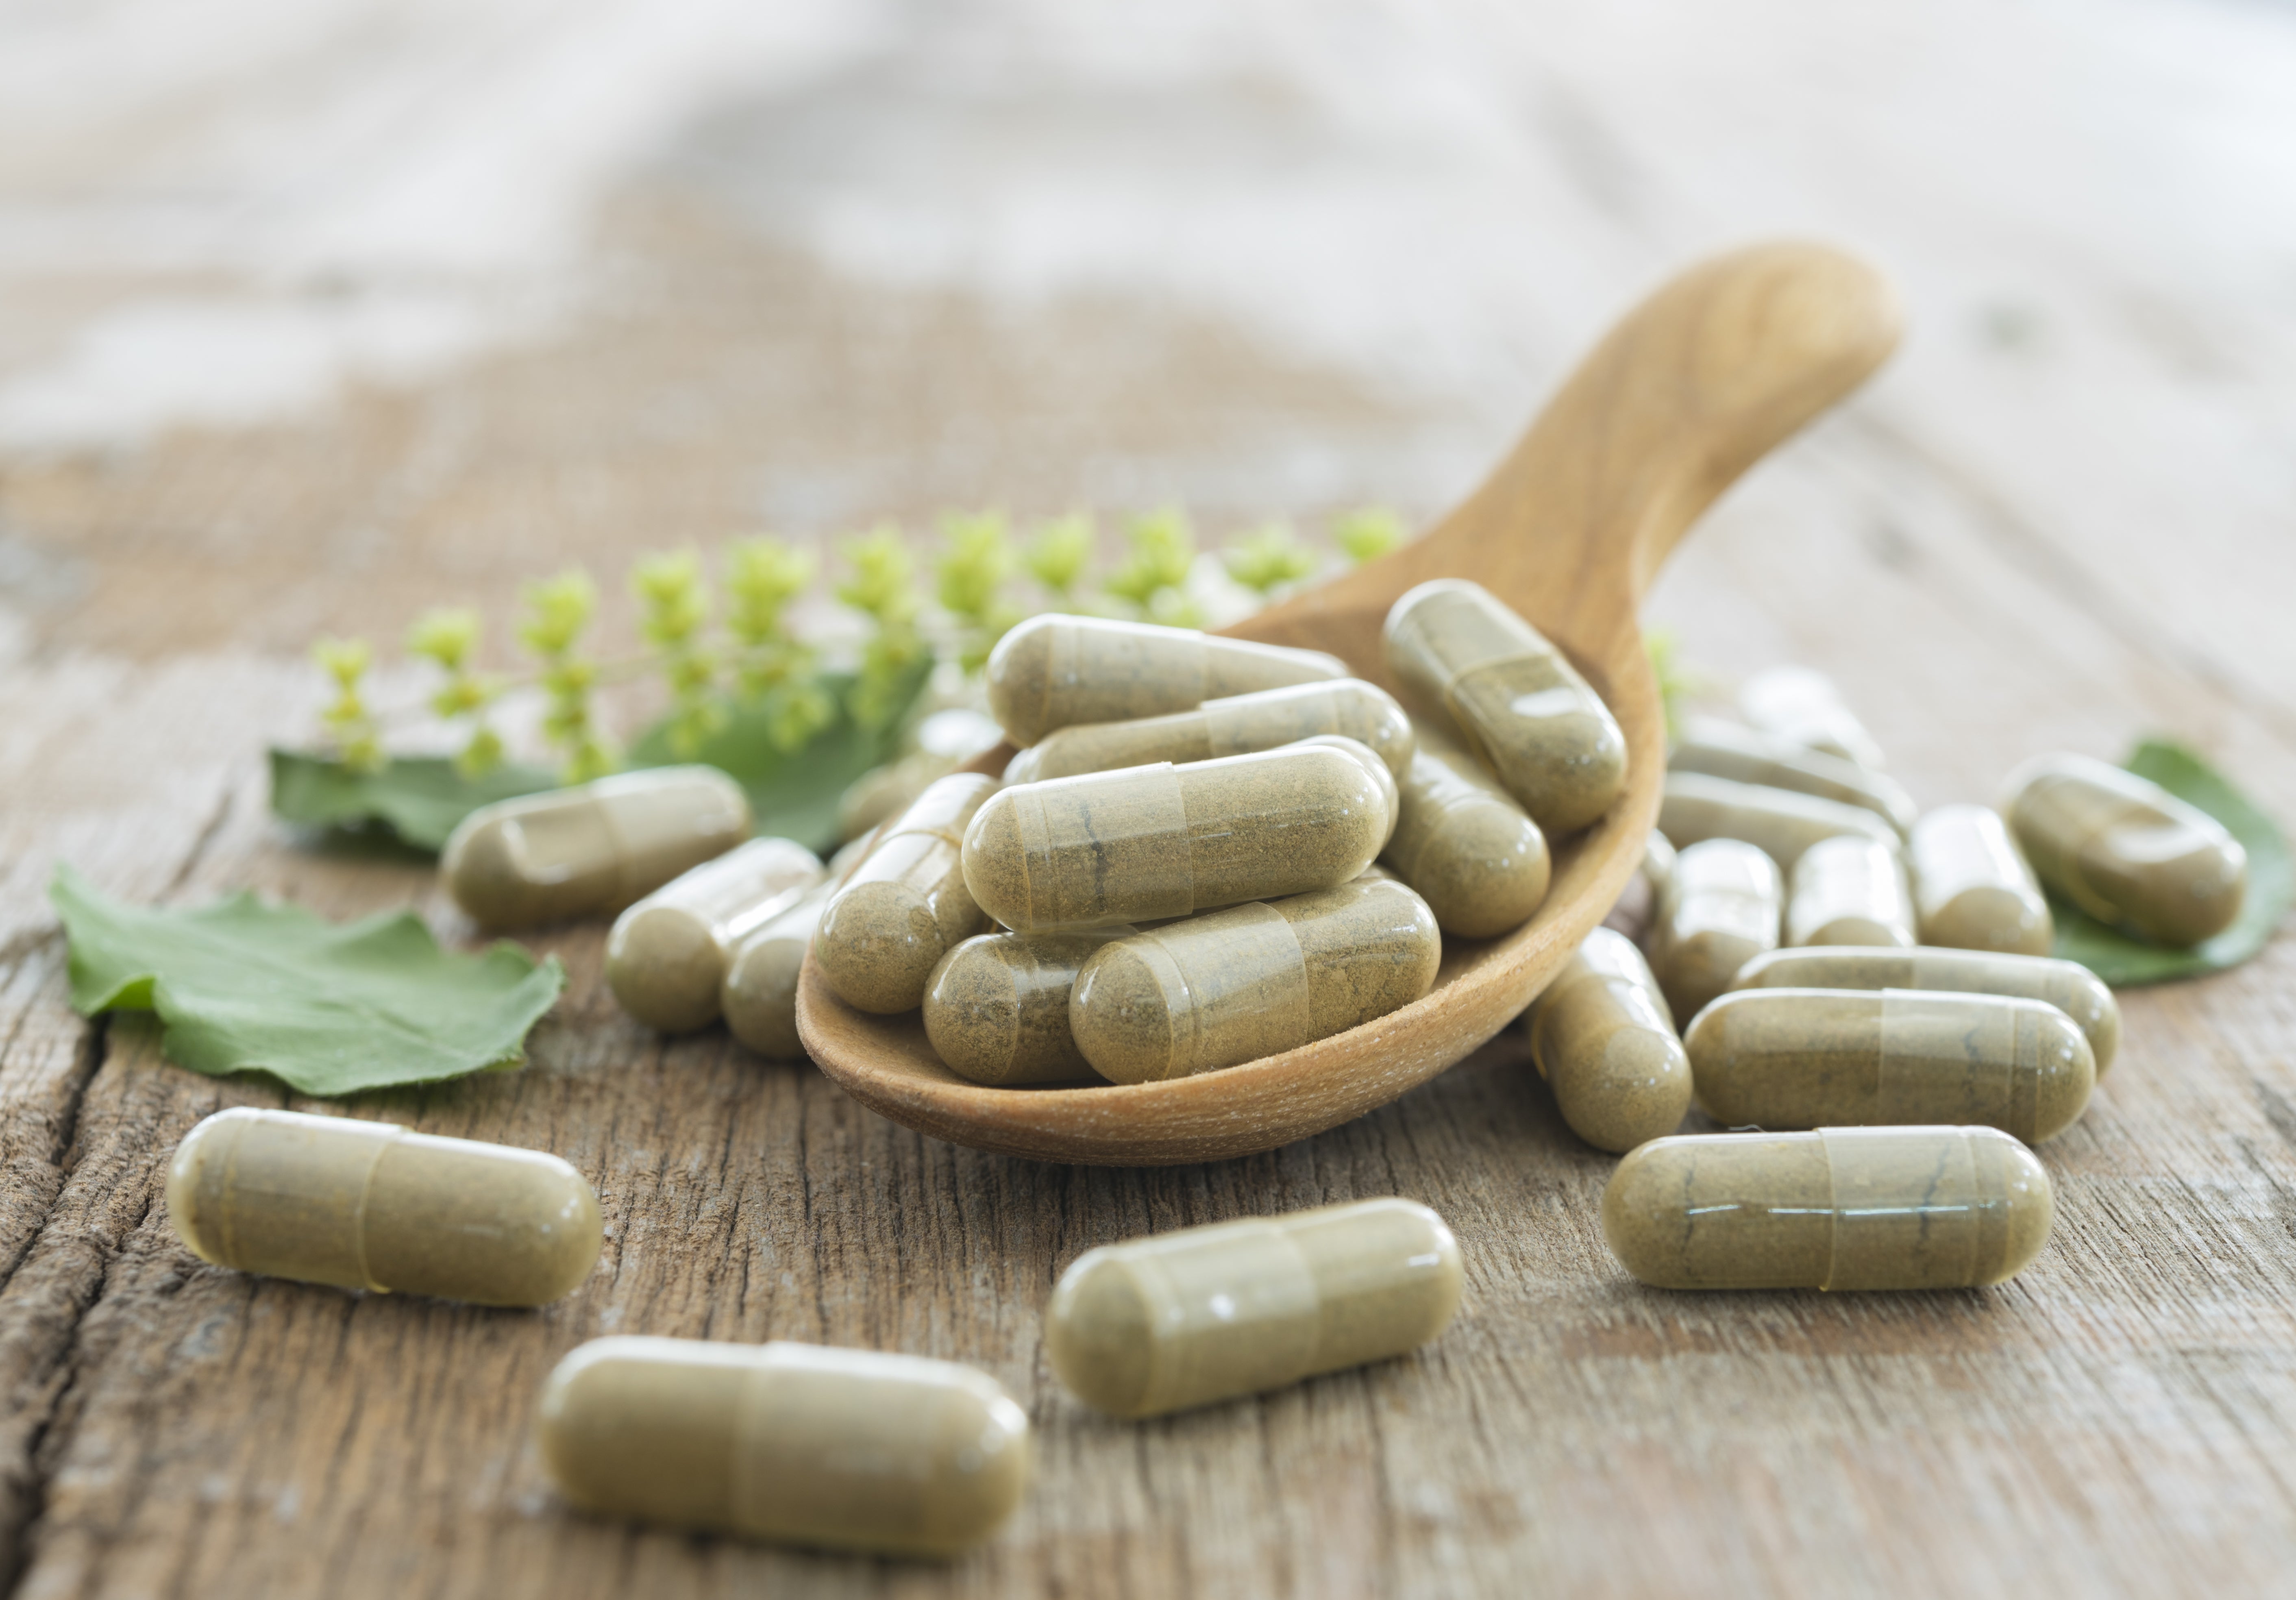 Dietary Supplements Support Your Best Life | BJ's Wholesale Club - Official Blog